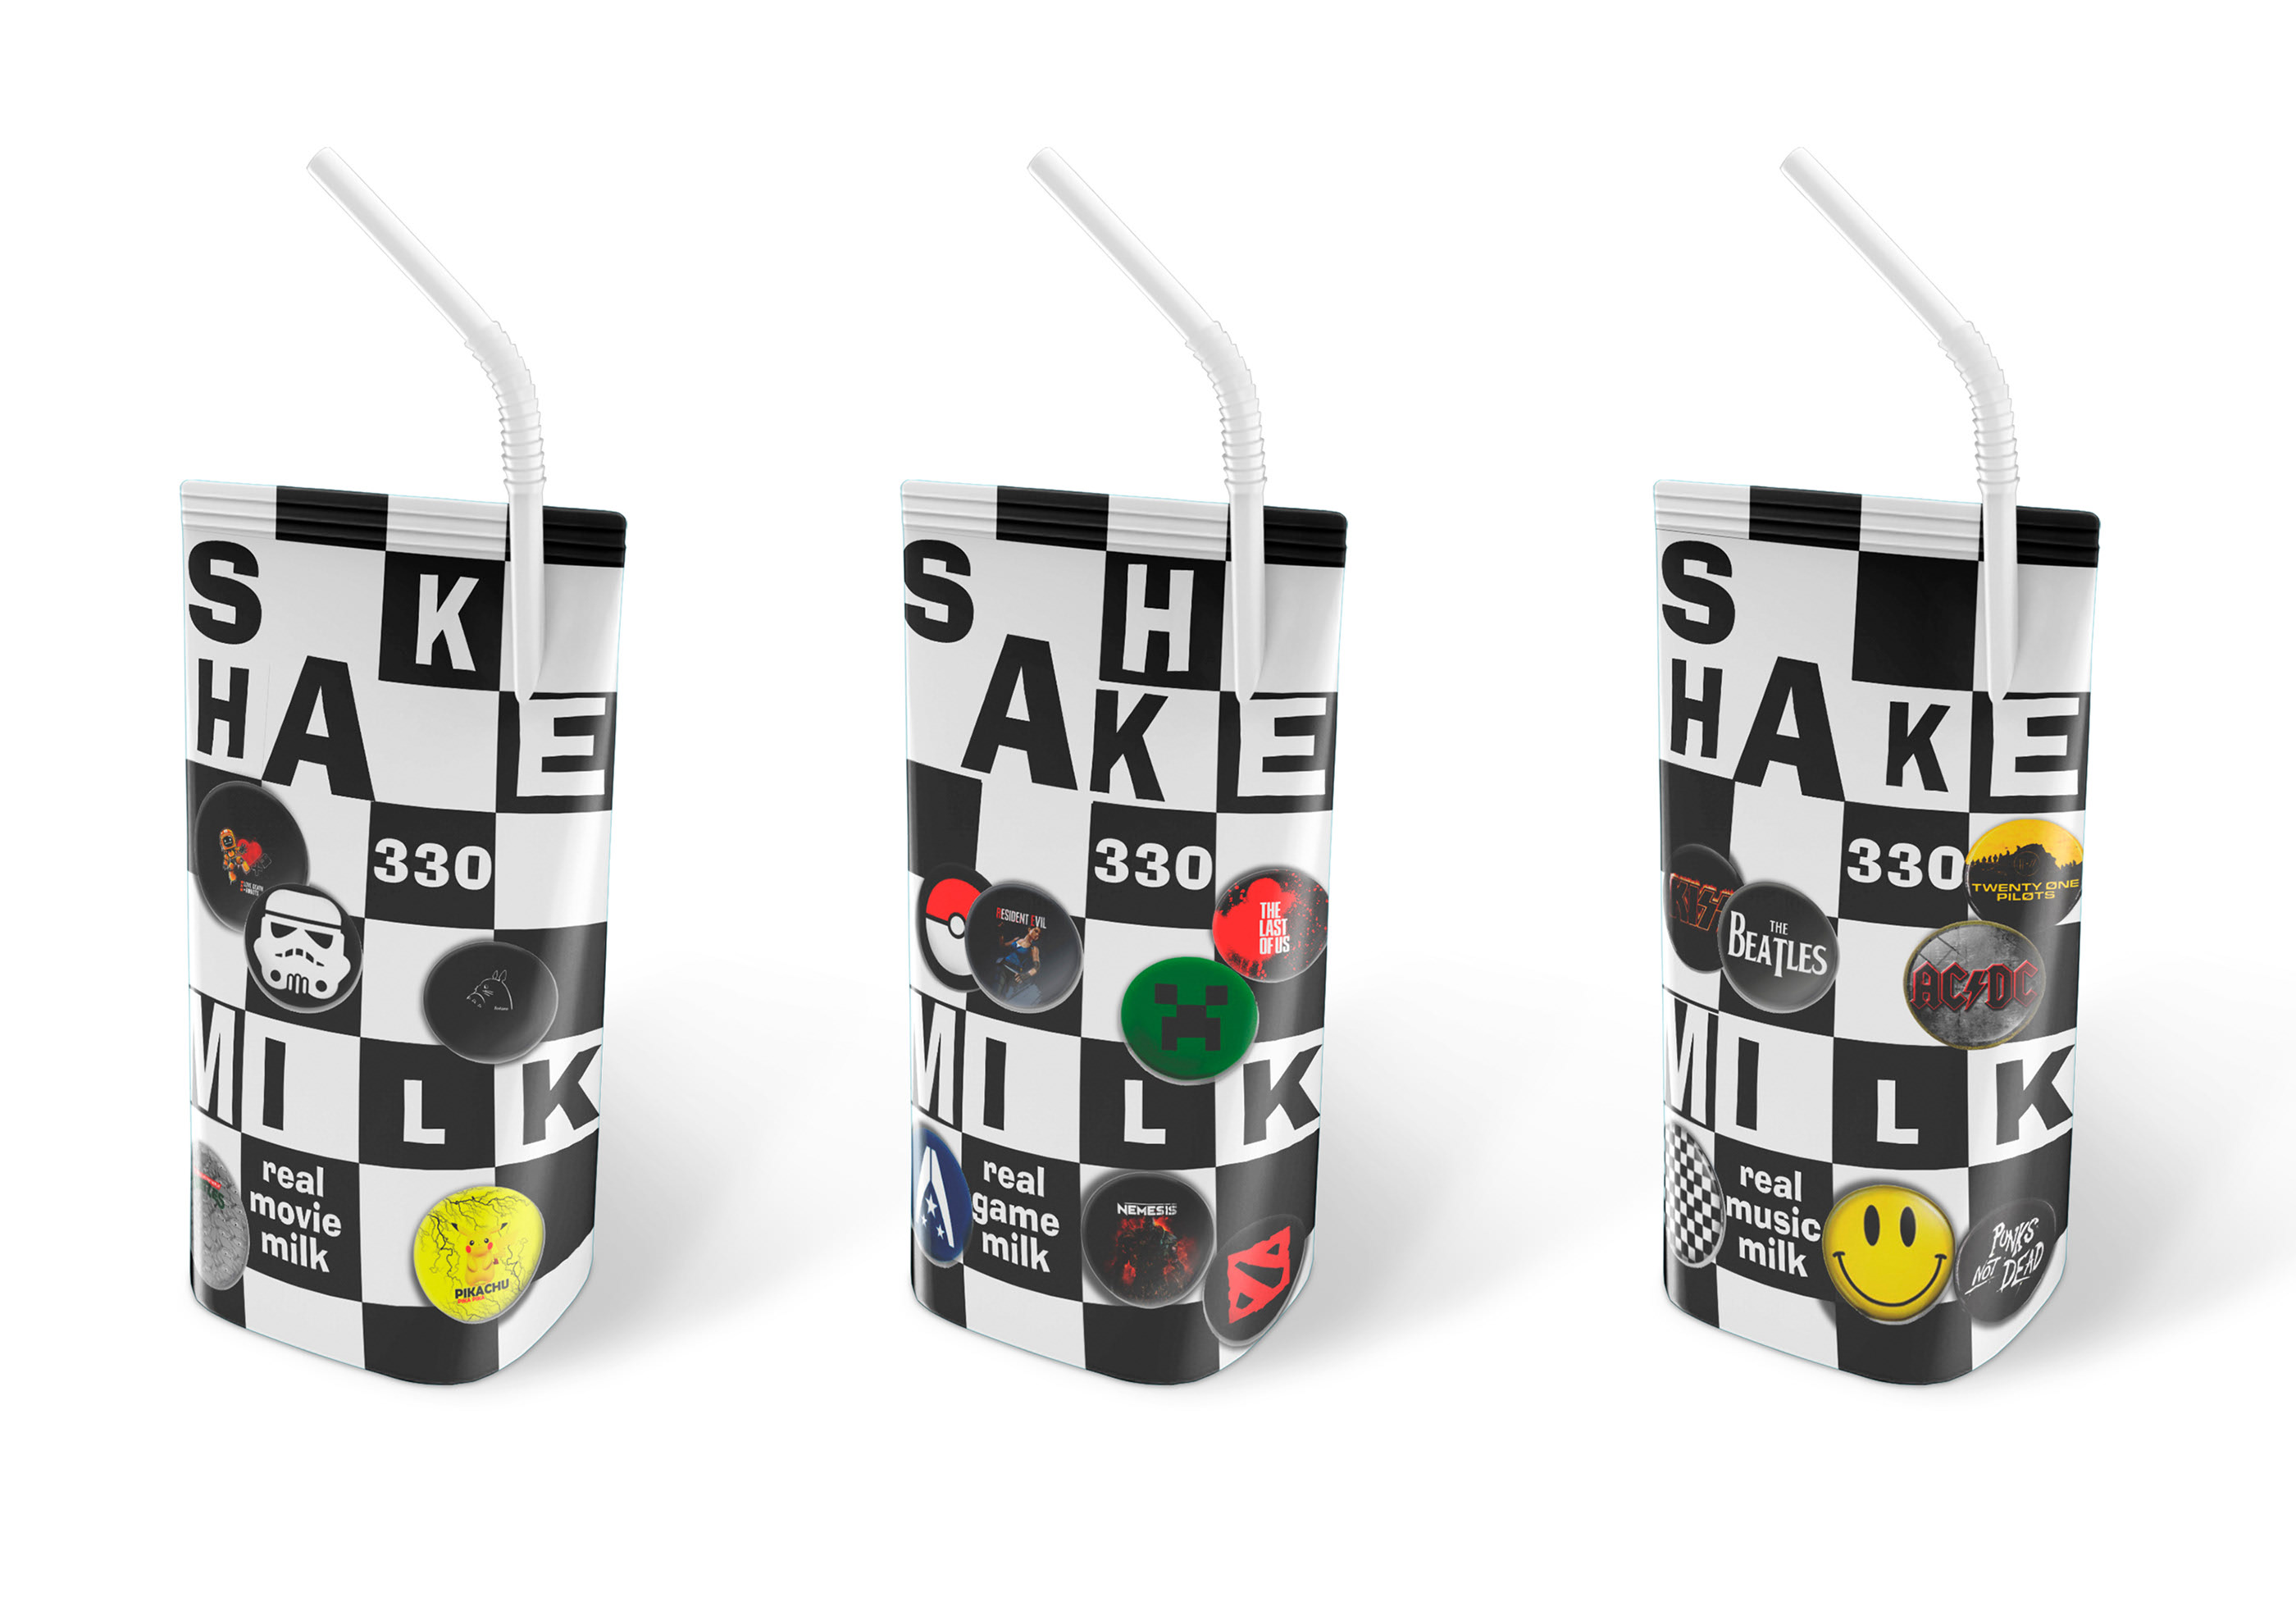 Student Concept for Shake Milk Targeted for Teenagers